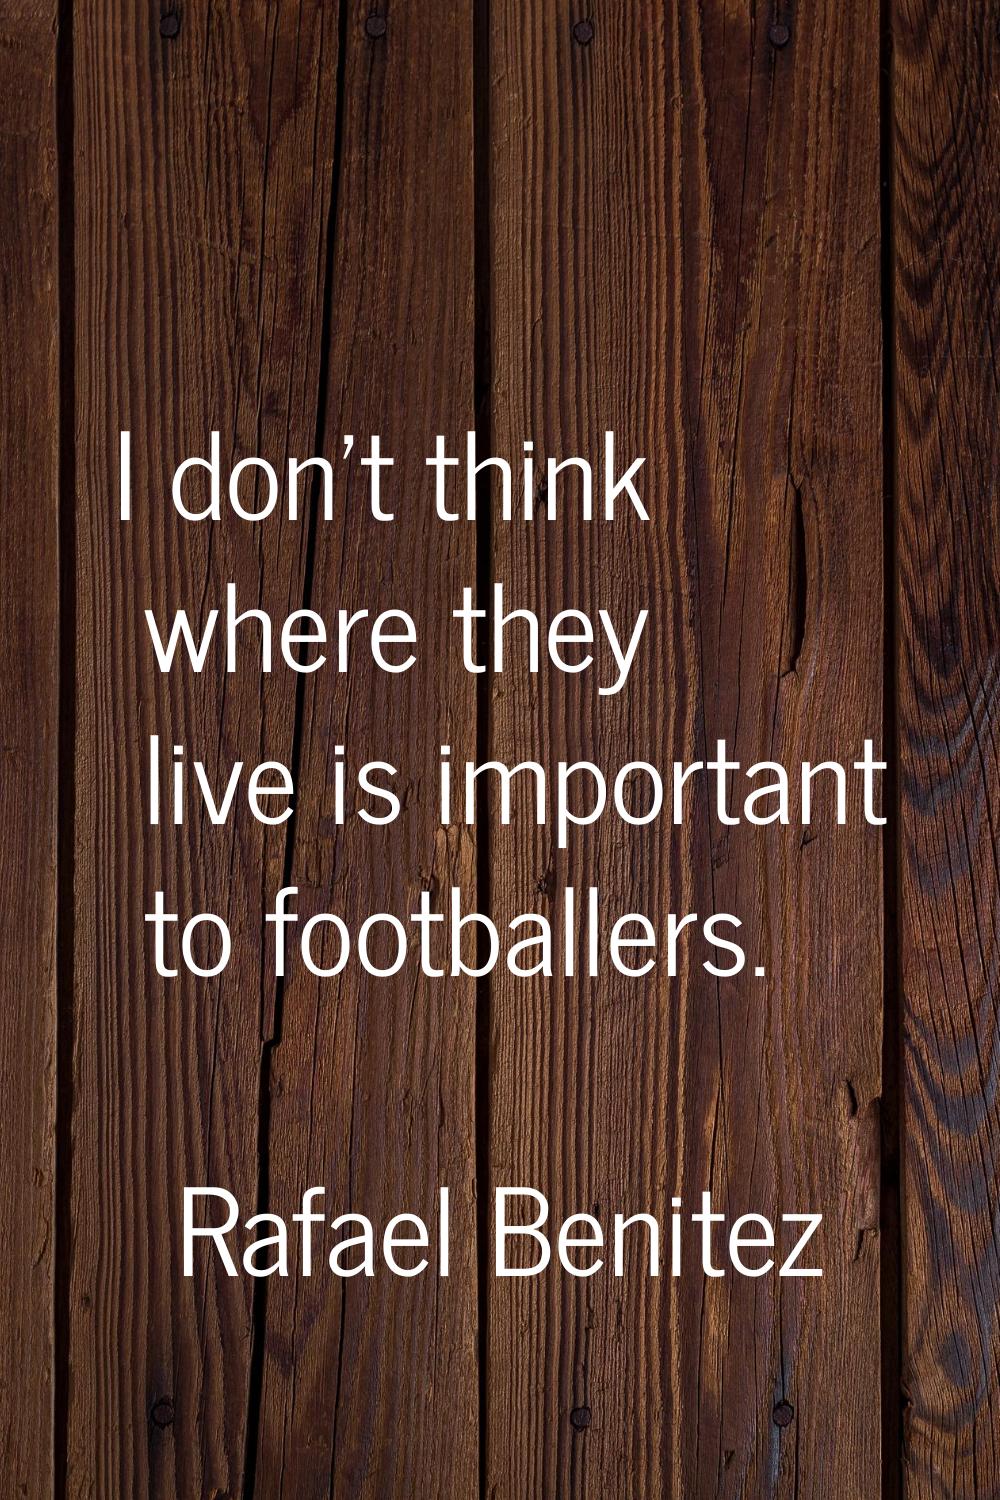 I don't think where they live is important to footballers.